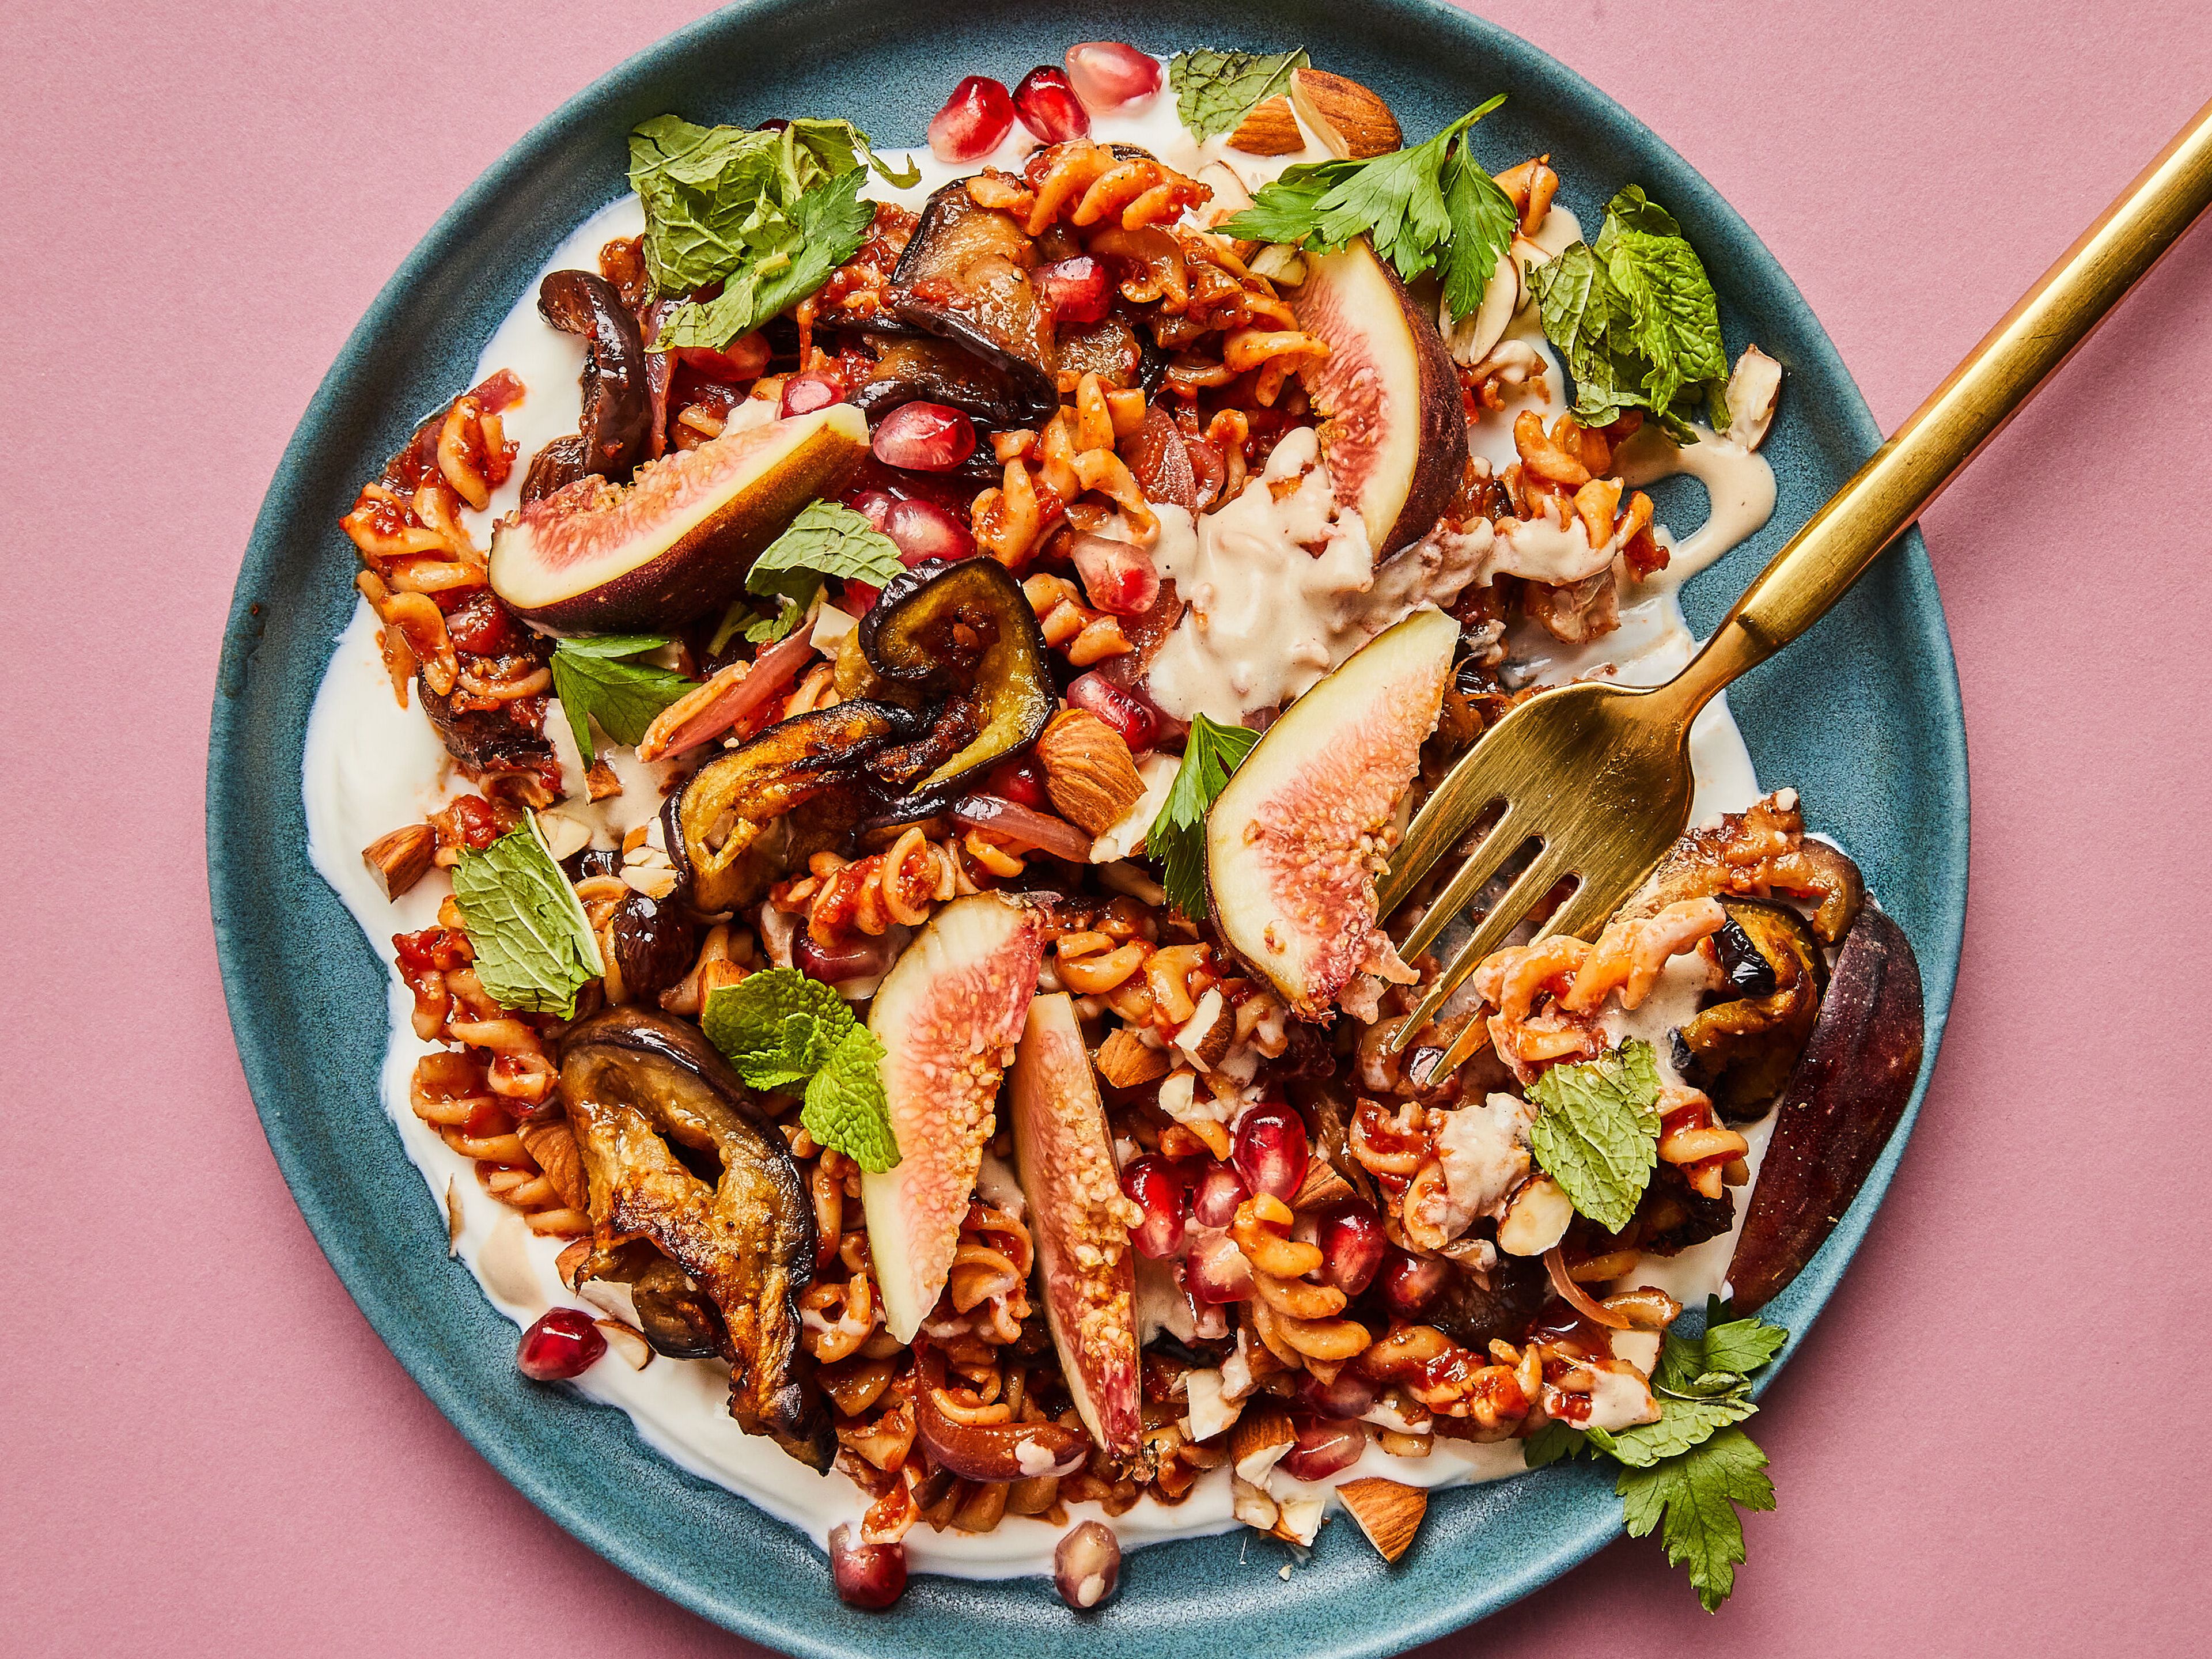 Chickpea pasta salad with eggplant and pomegranate